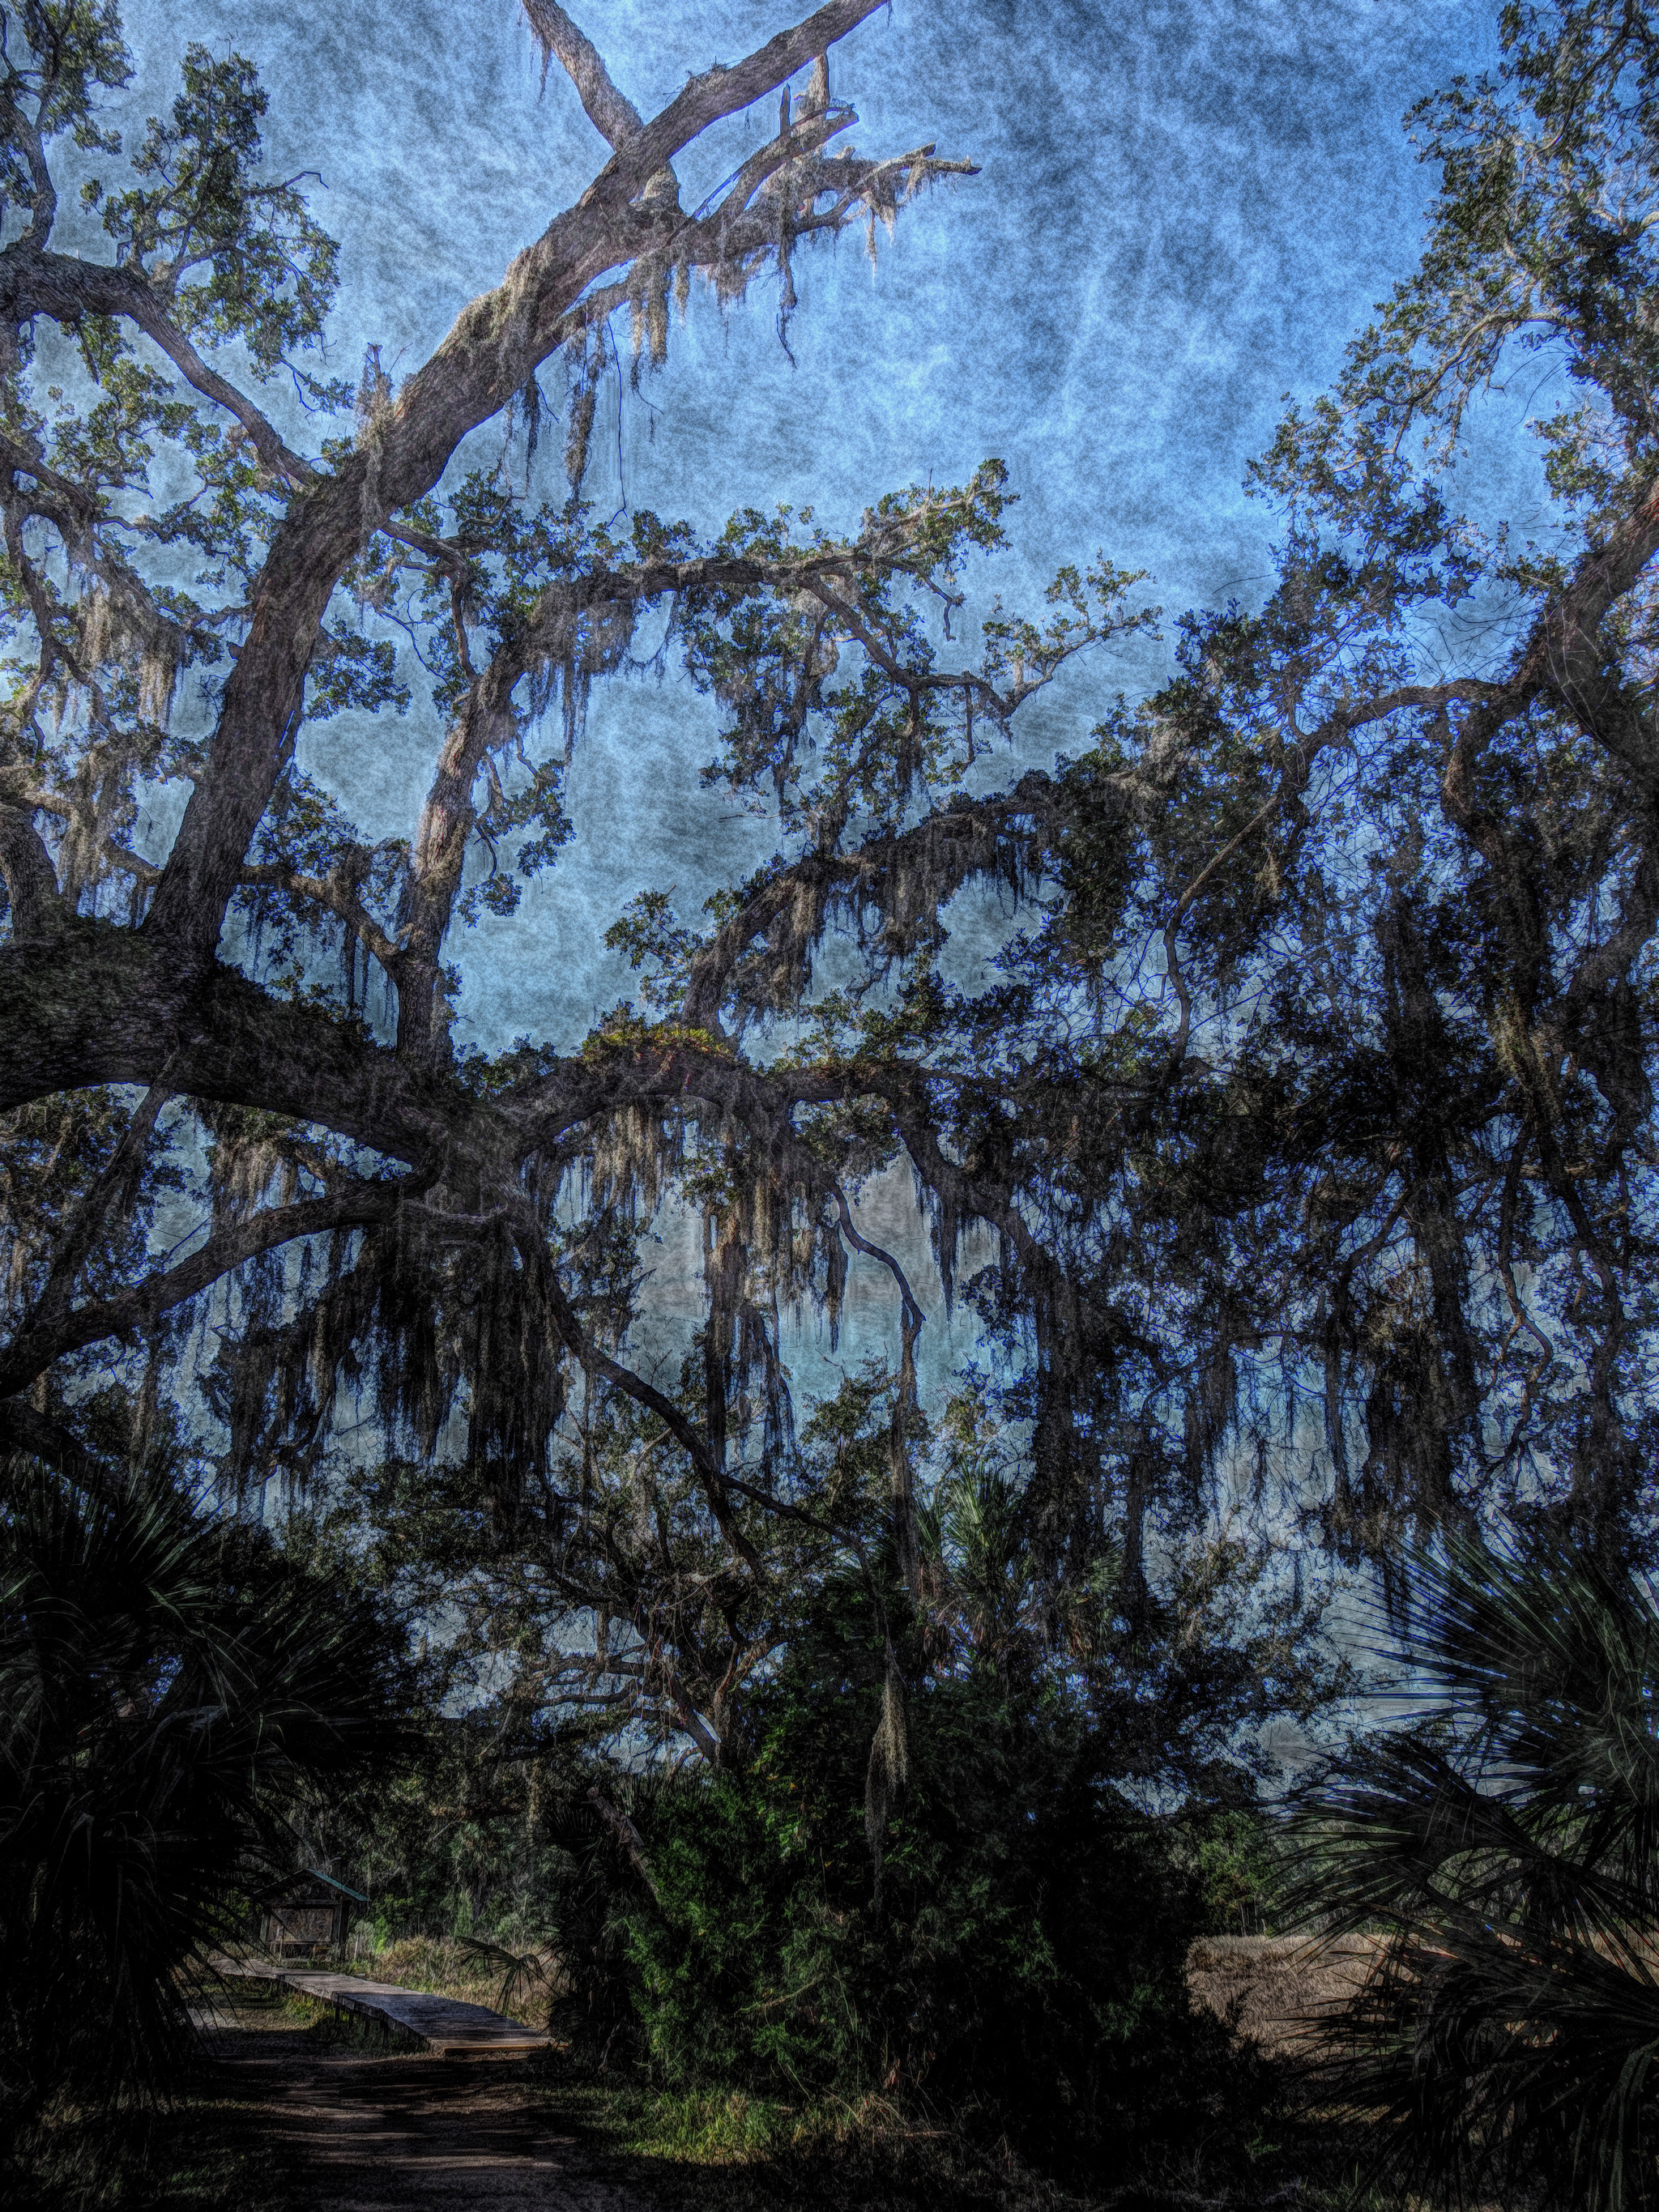 Stylized photo of a gnarled oak tree covered with Spanish Moss.